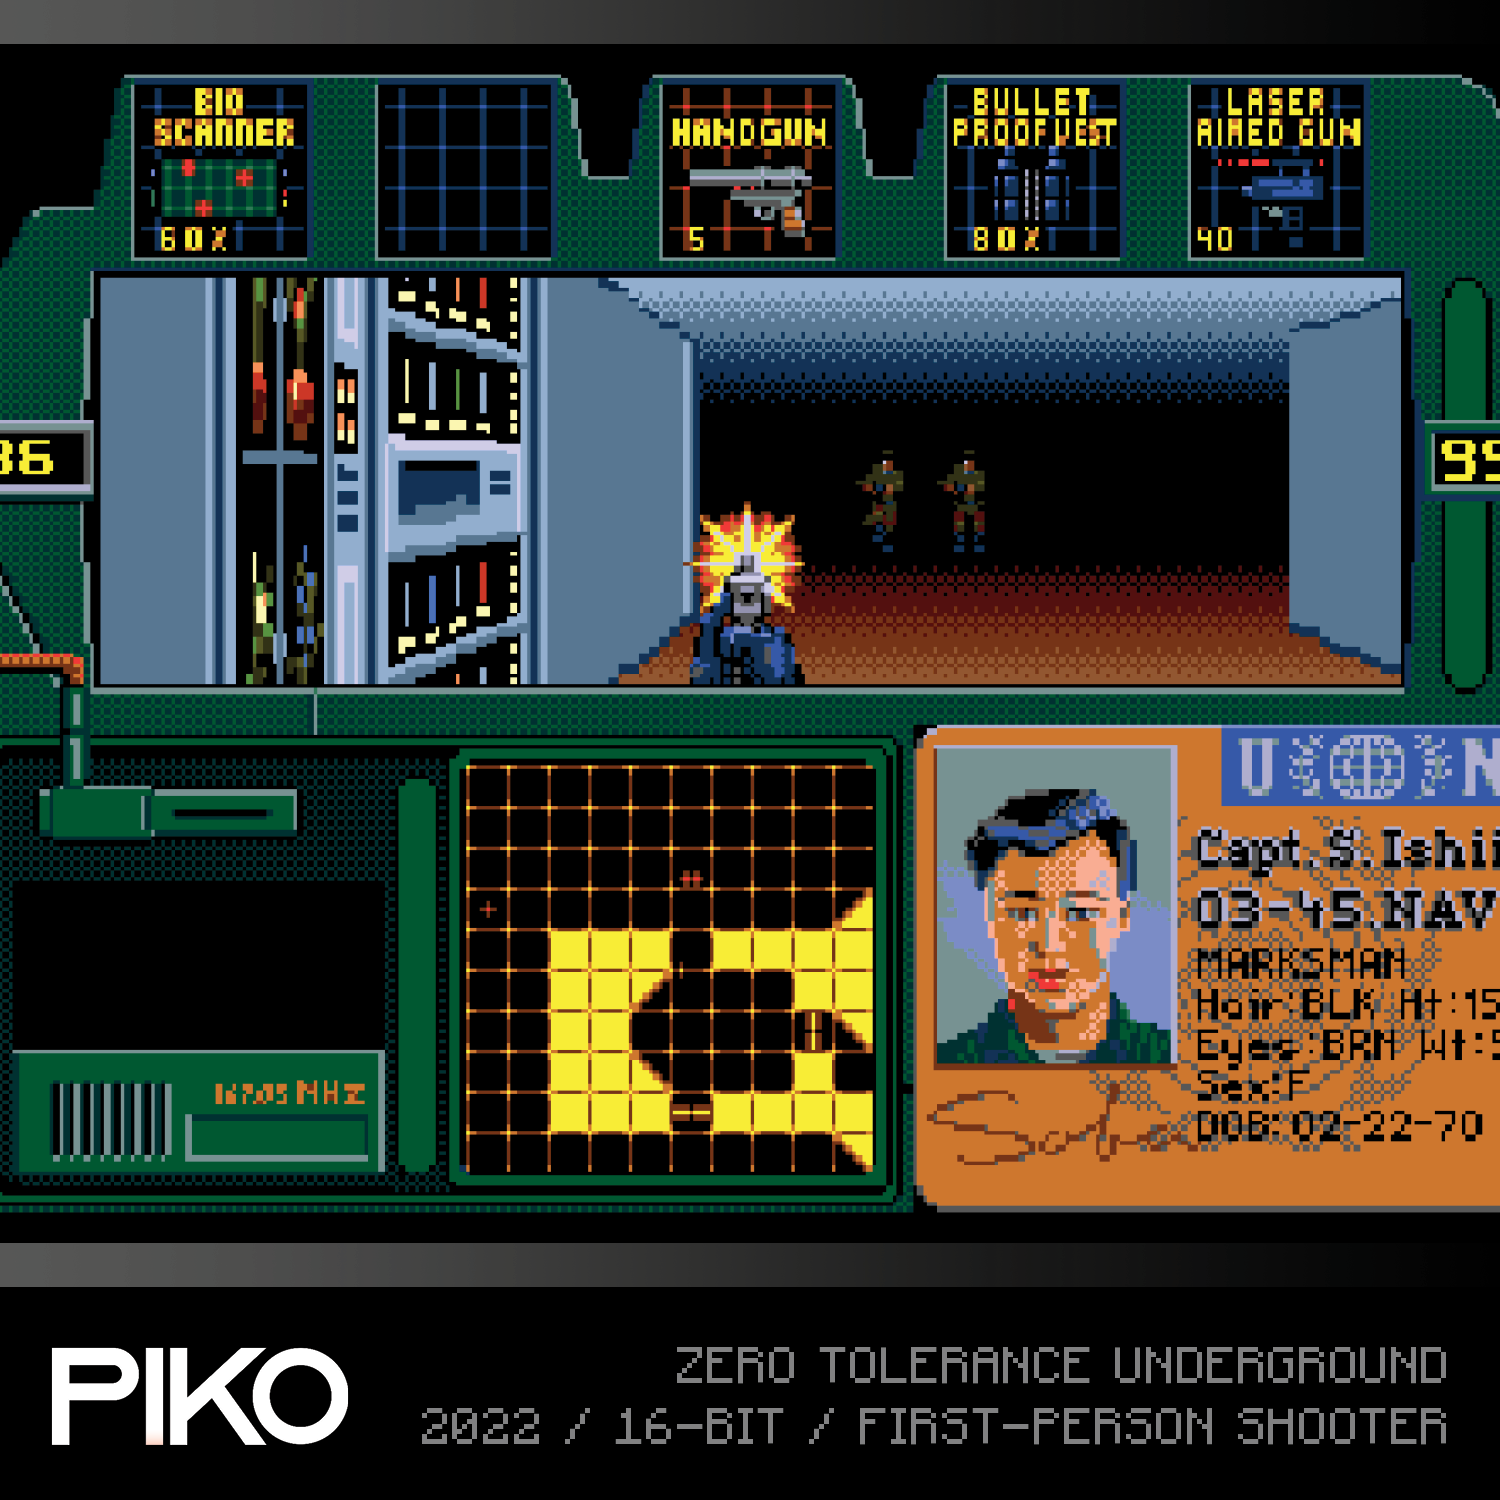 Piko Collection 4 and Sunsoft Collection 2 Double Pack